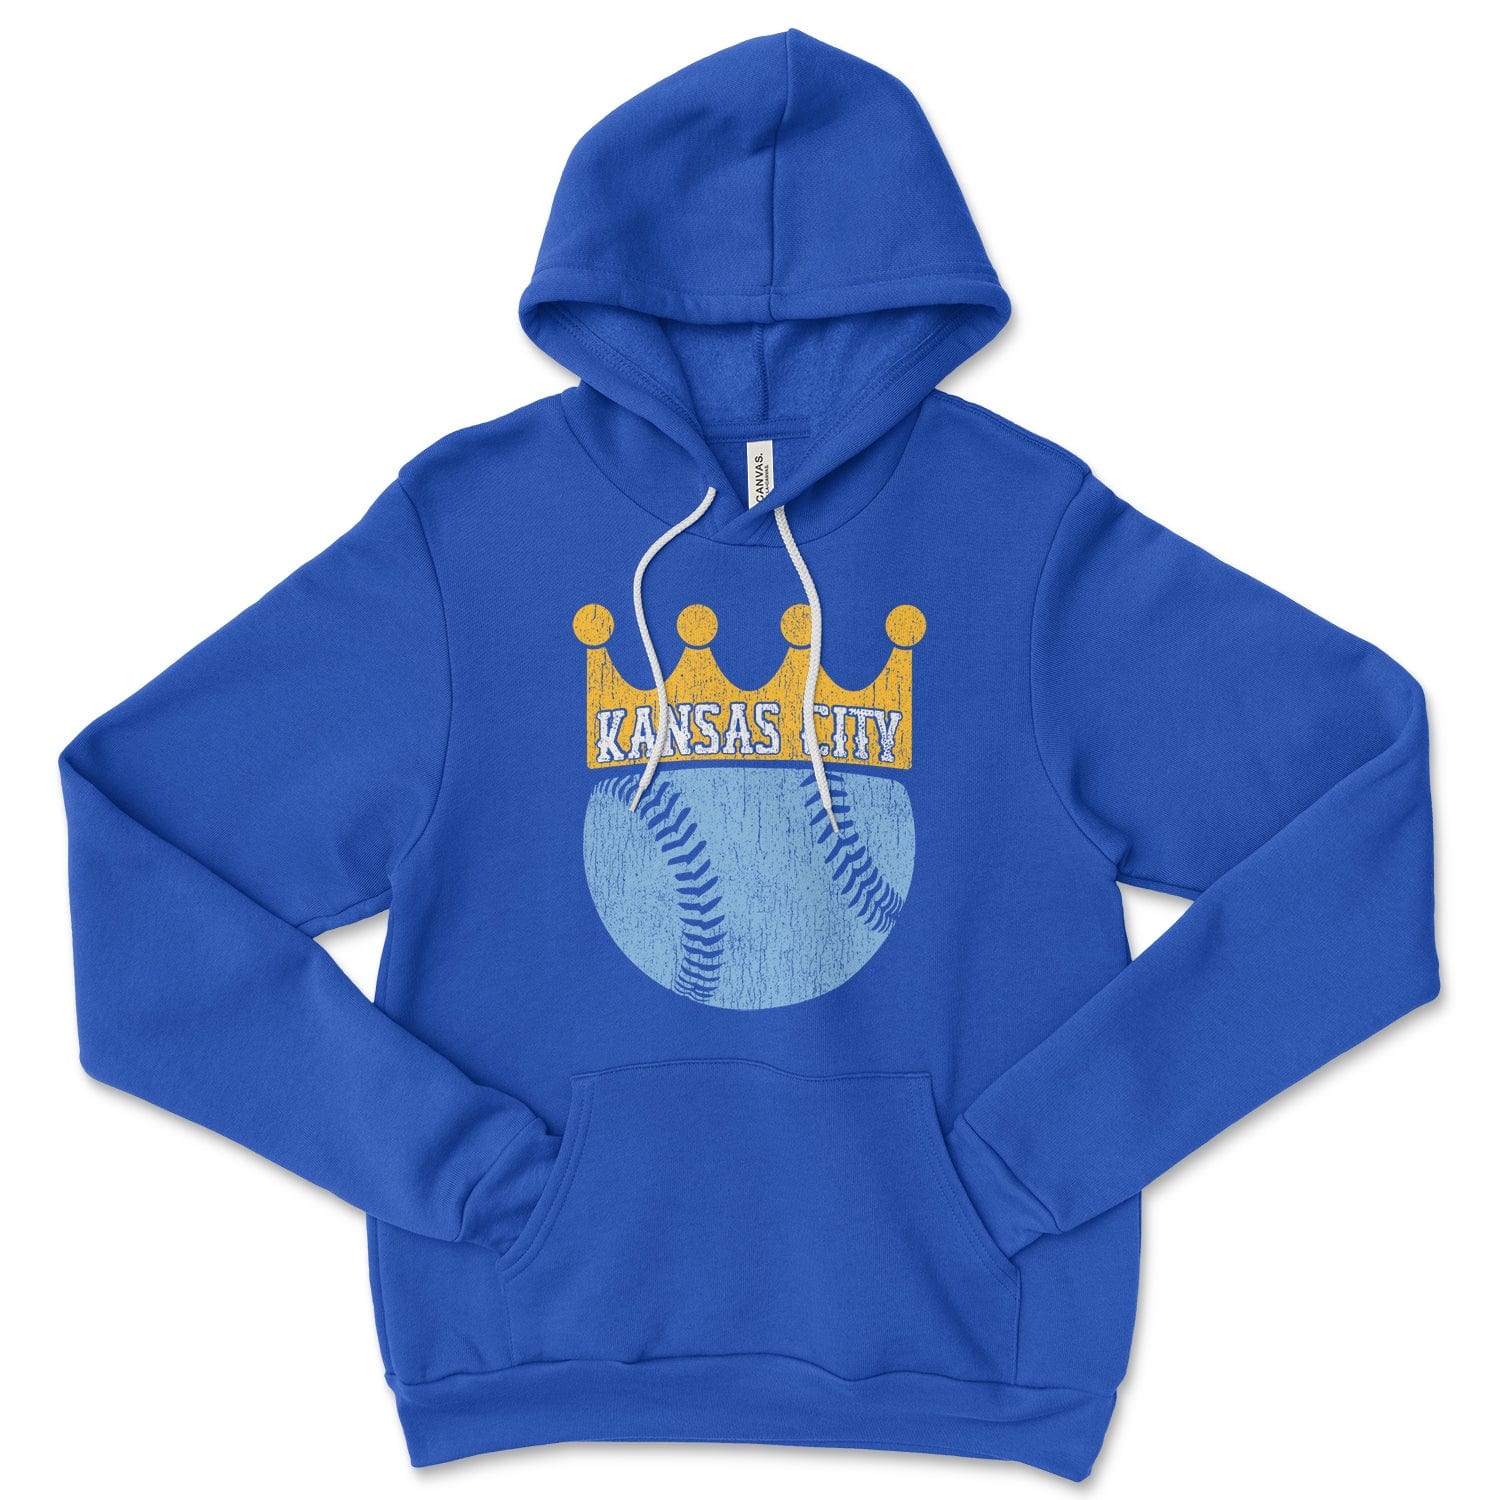 KC Swag Kansas City Royals powder blue baseball wearing a gold crown with KANSAS CITY text on royal blue pull-over hoodie